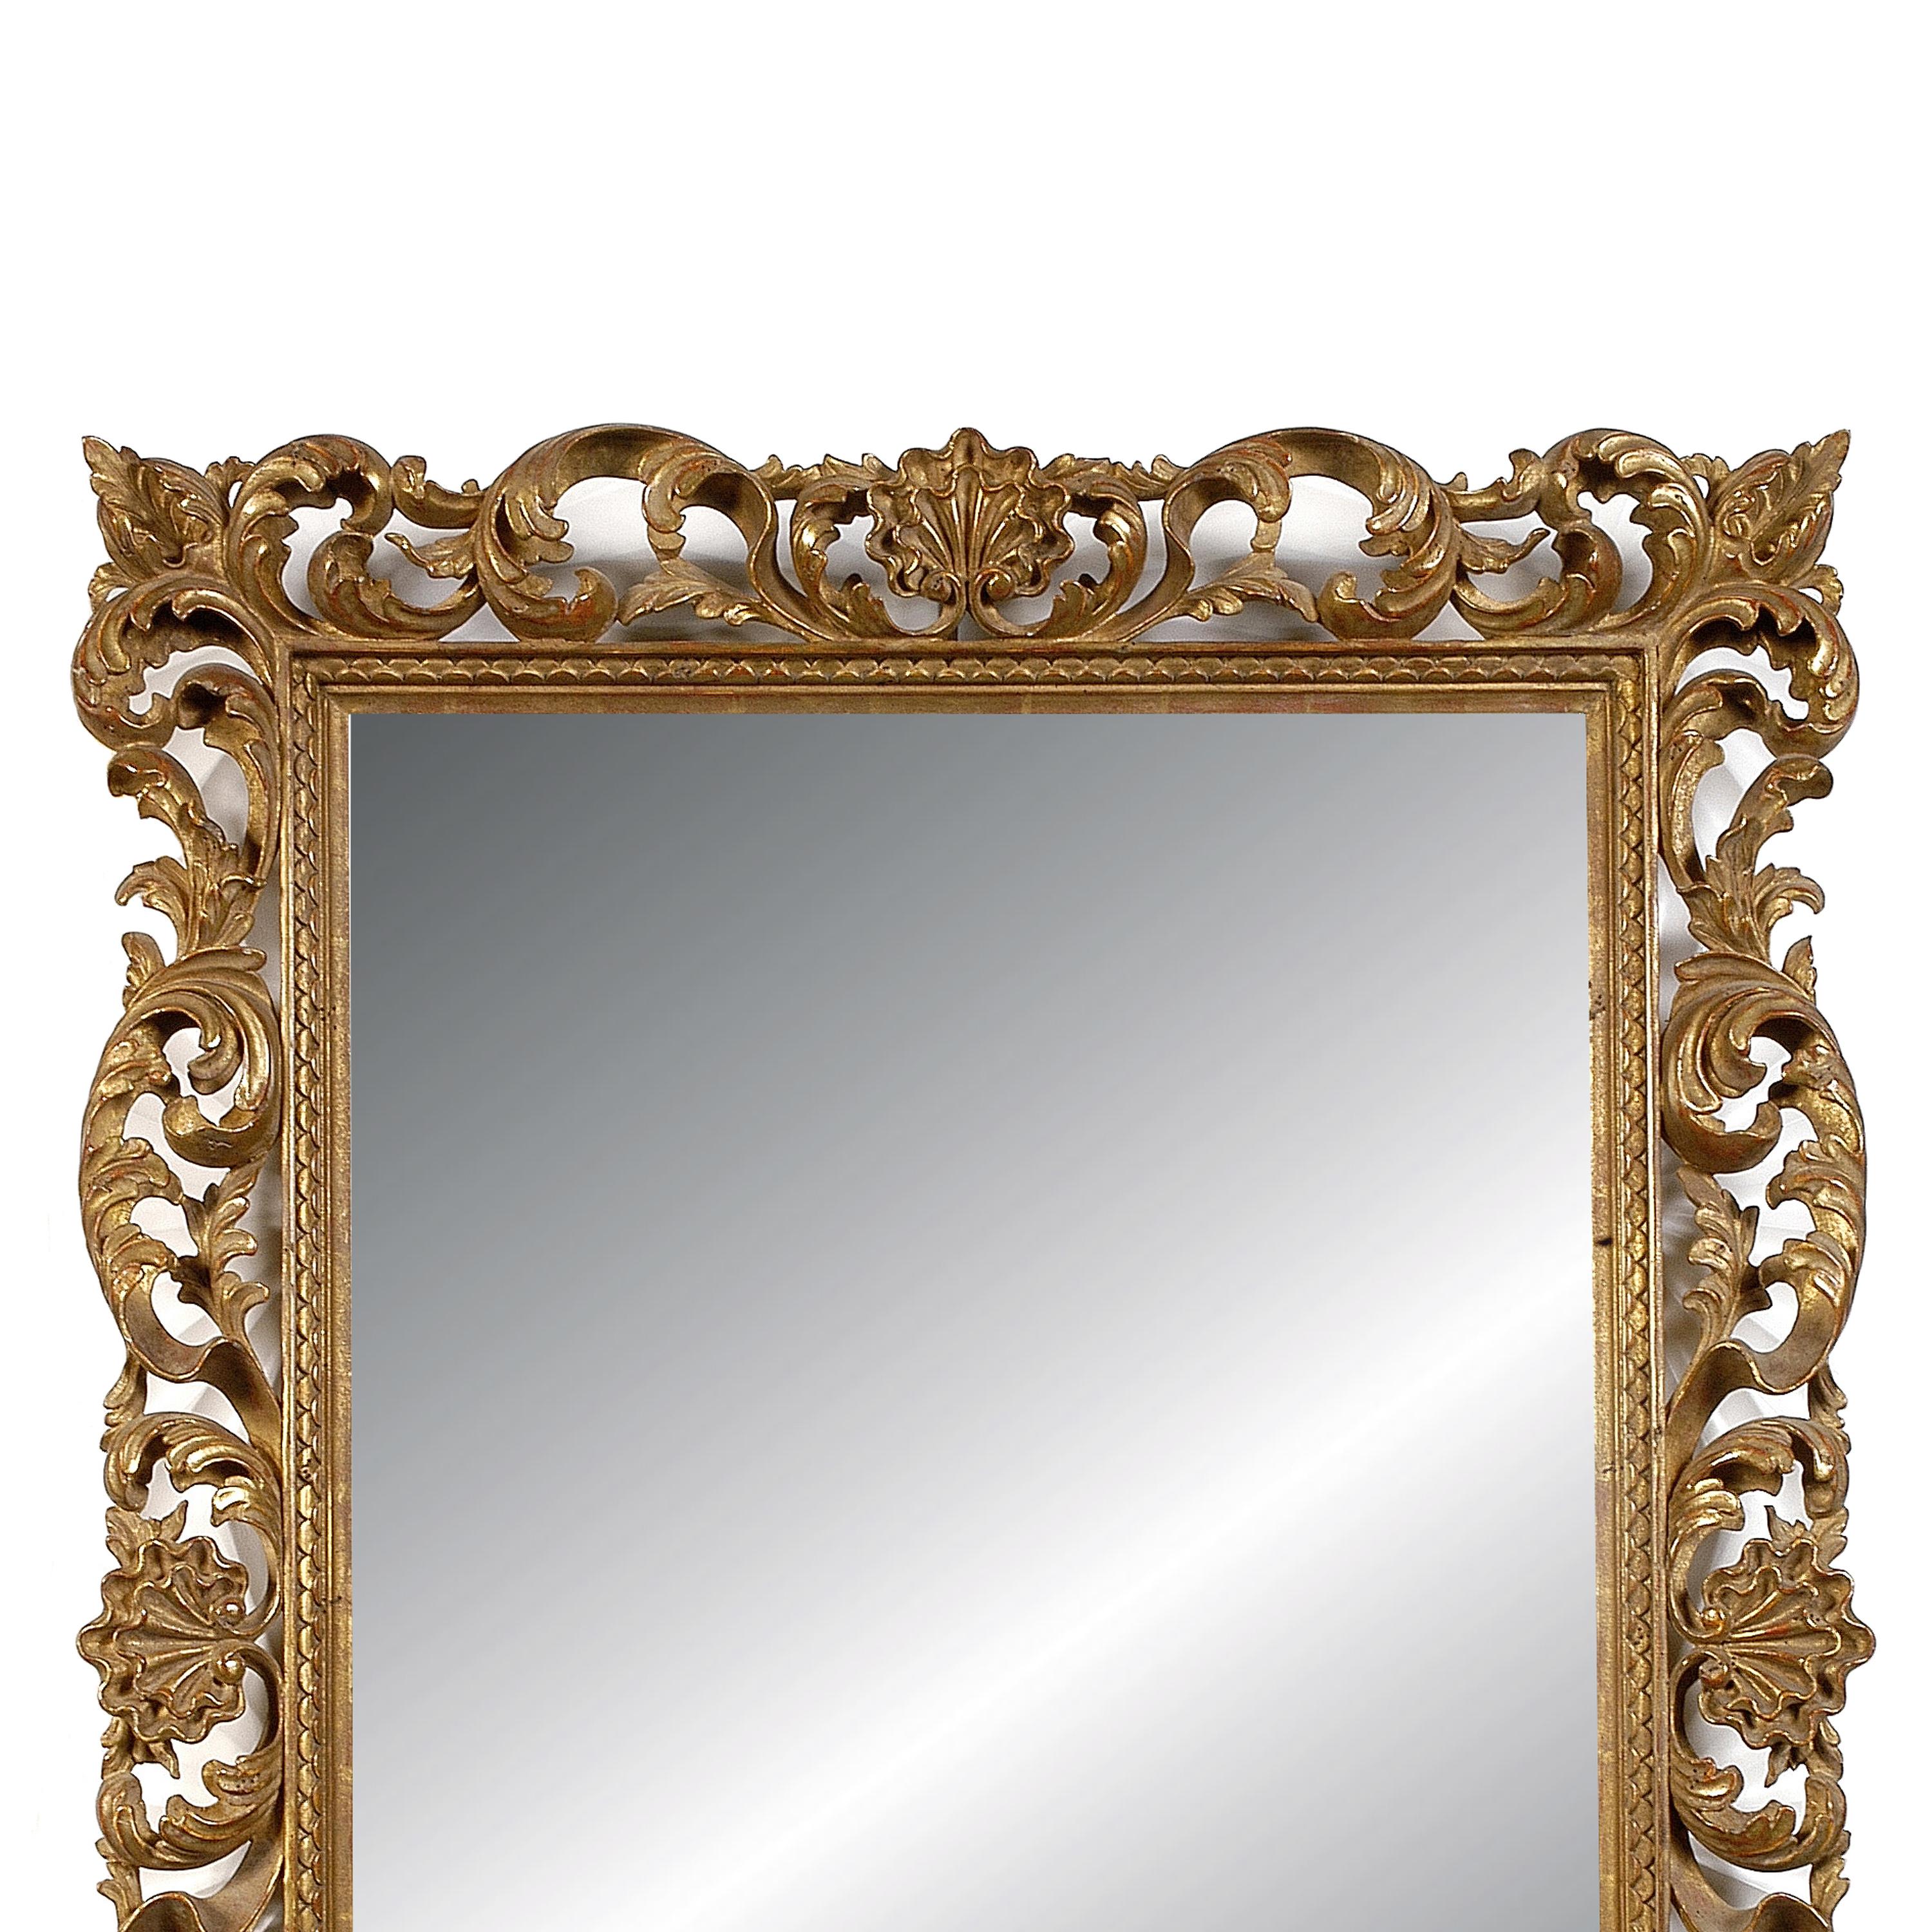 Art Nouveau style handcrafted mirror. Rectangular hand carved wooden structure with gold foil finished. Spain, 1970.